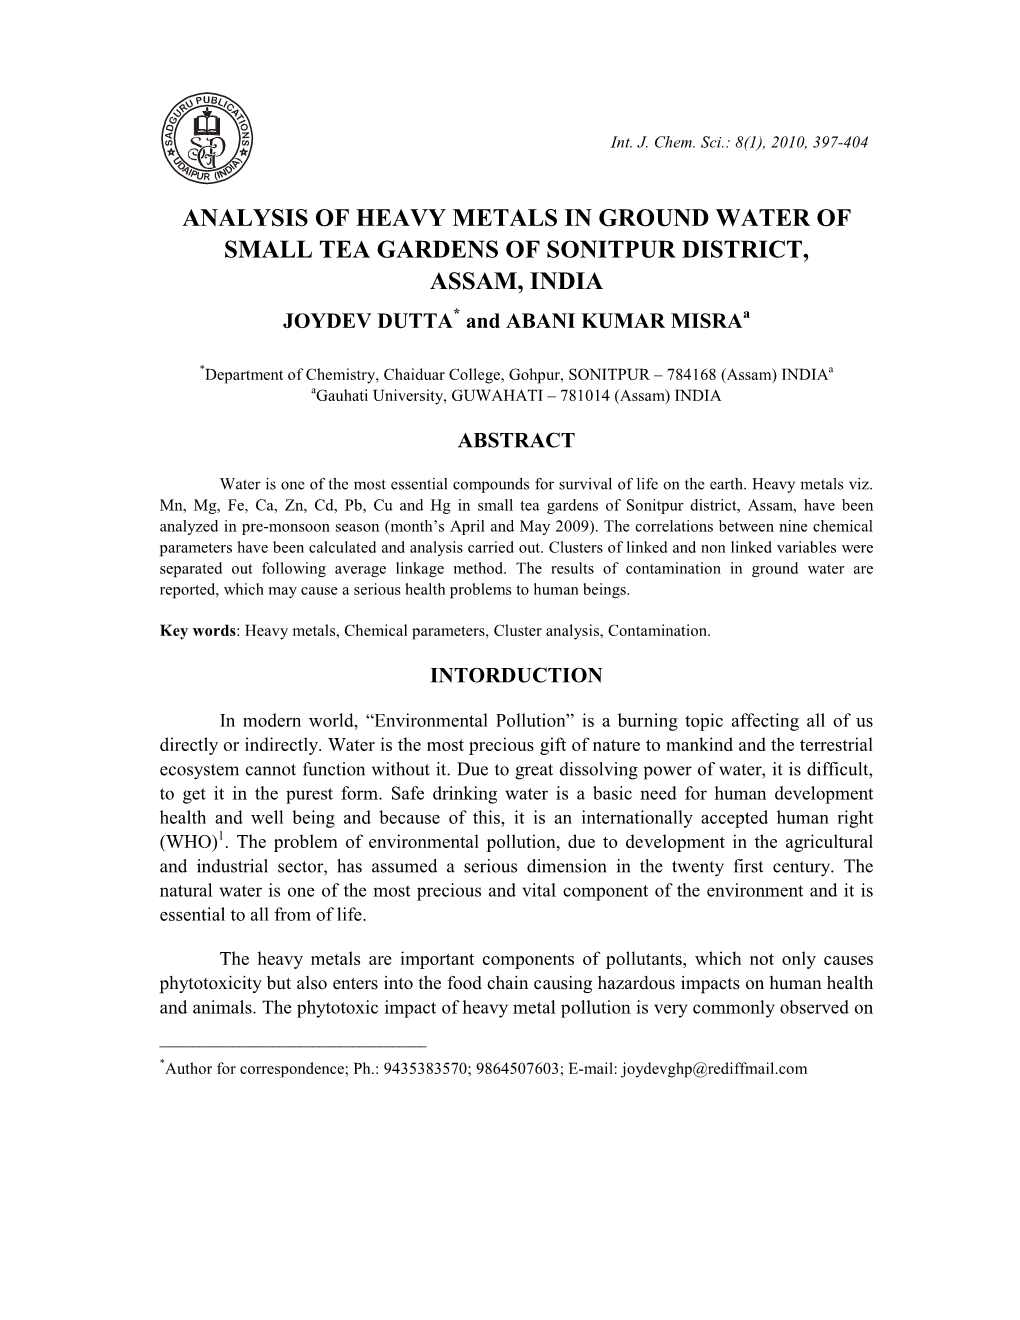 ANALYSIS of HEAVY METALS in GROUND WATER of SMALL TEA GARDENS of SONITPUR DISTRICT, ASSAM, INDIA JOYDEV DUTTA * and ABANI KUMAR MISRA A